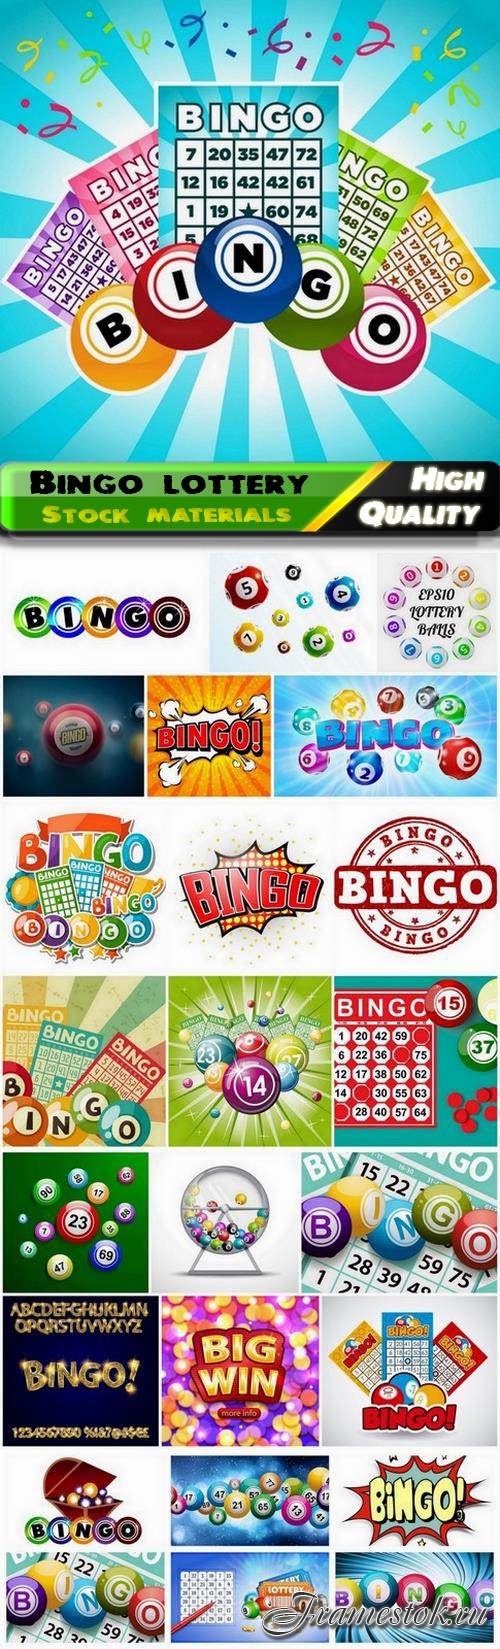 Bingo lottery game with ticket and balls with numbers 25 Eps